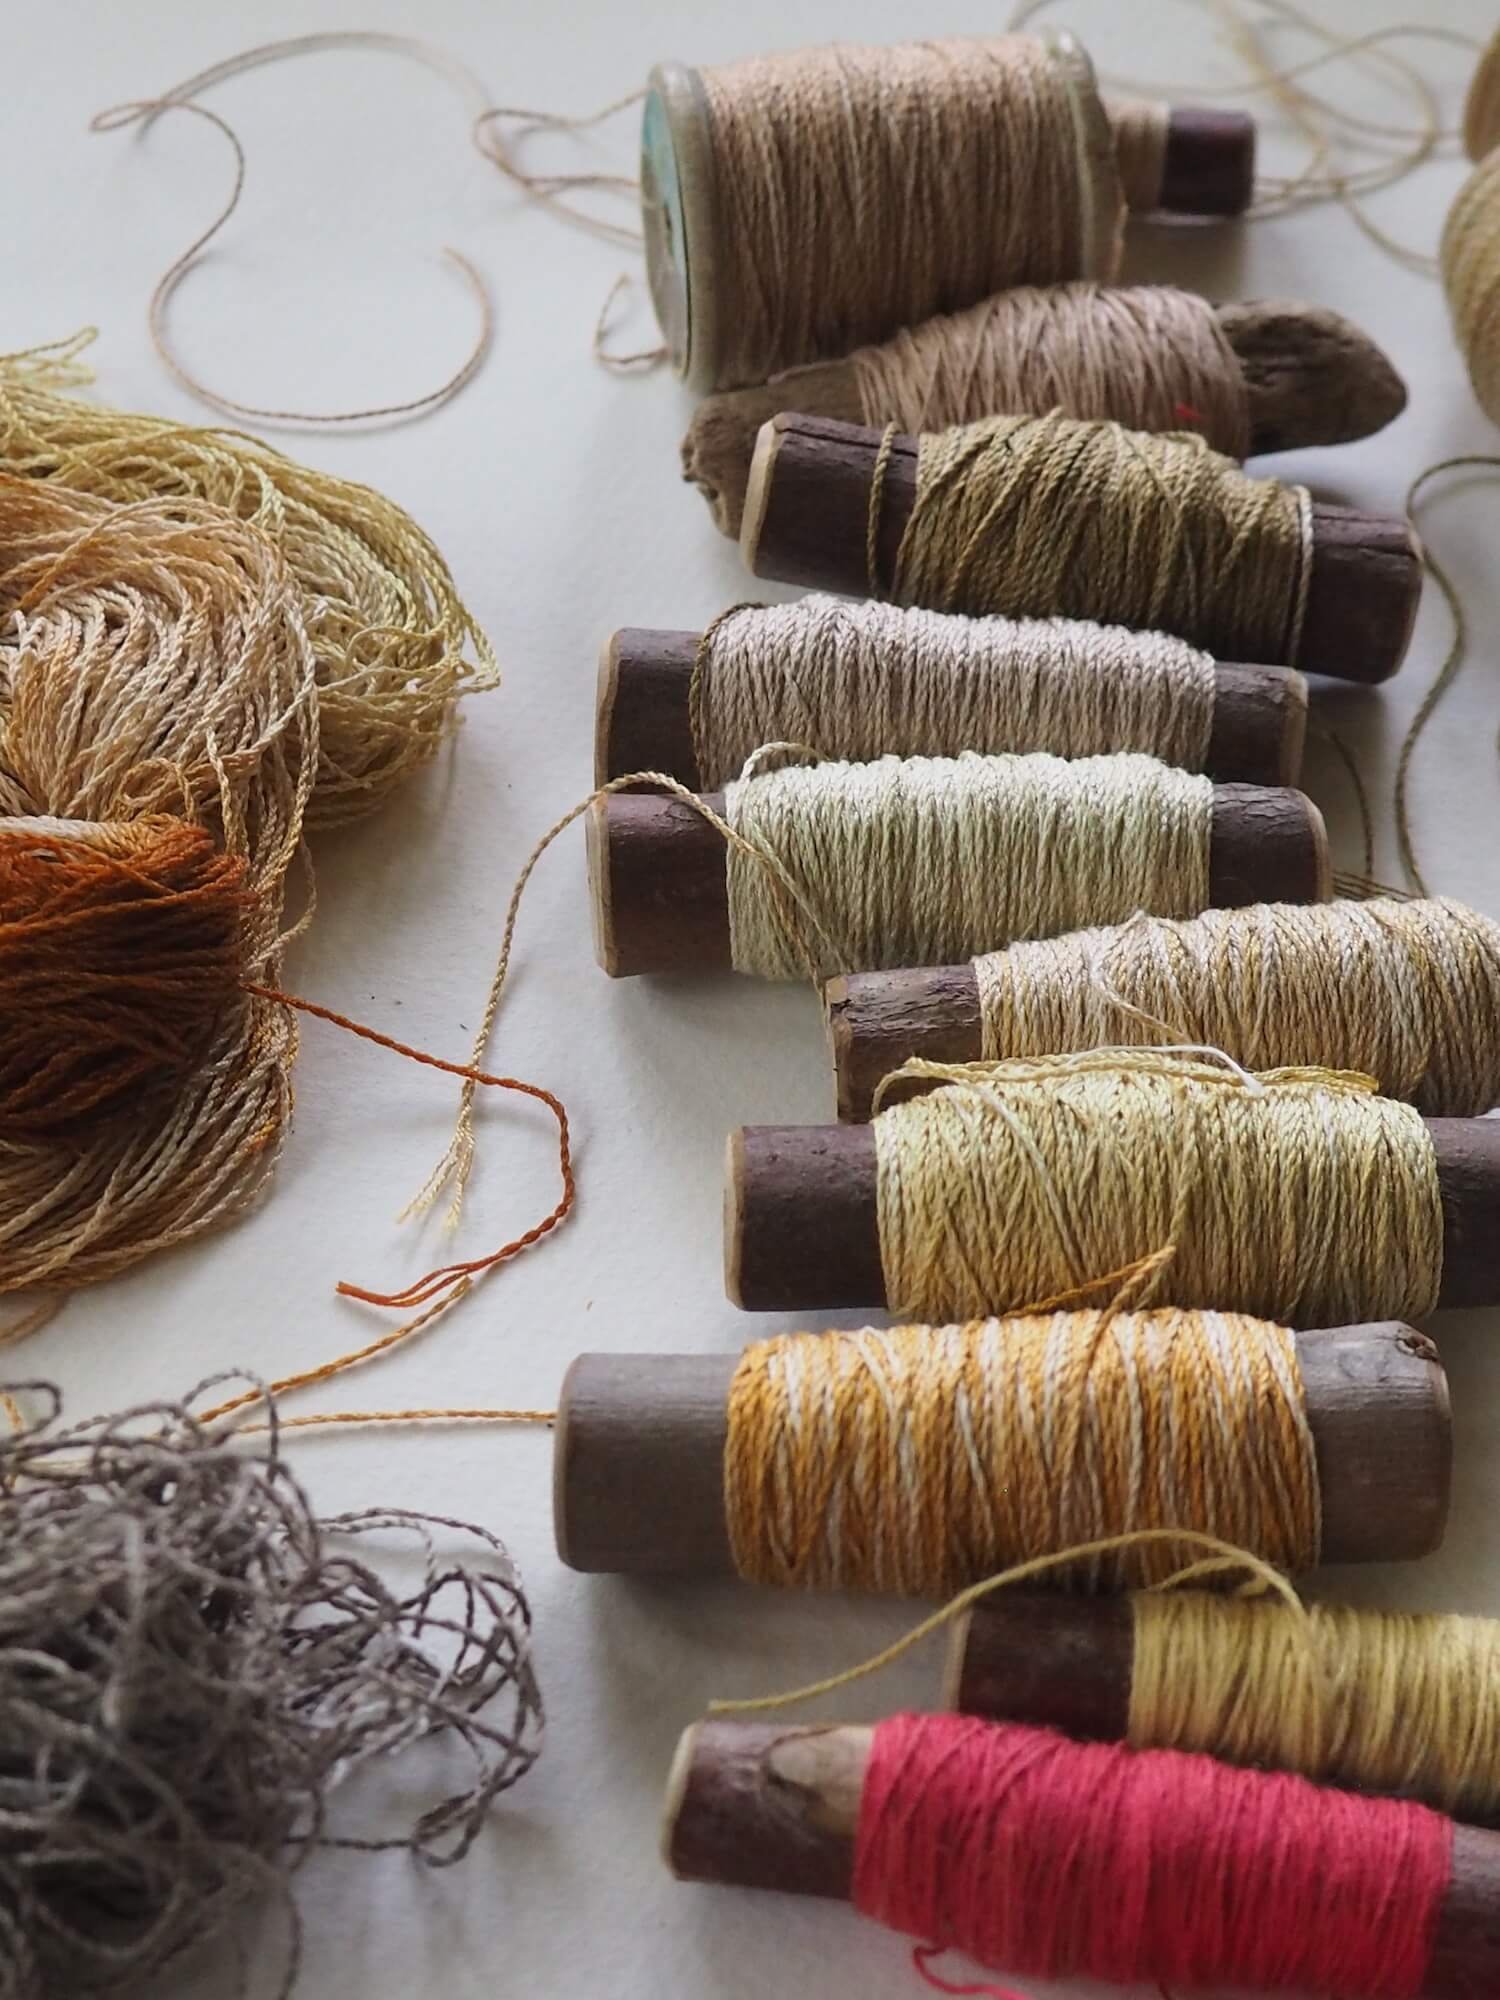 Dyeing fabric just got easier - Threads